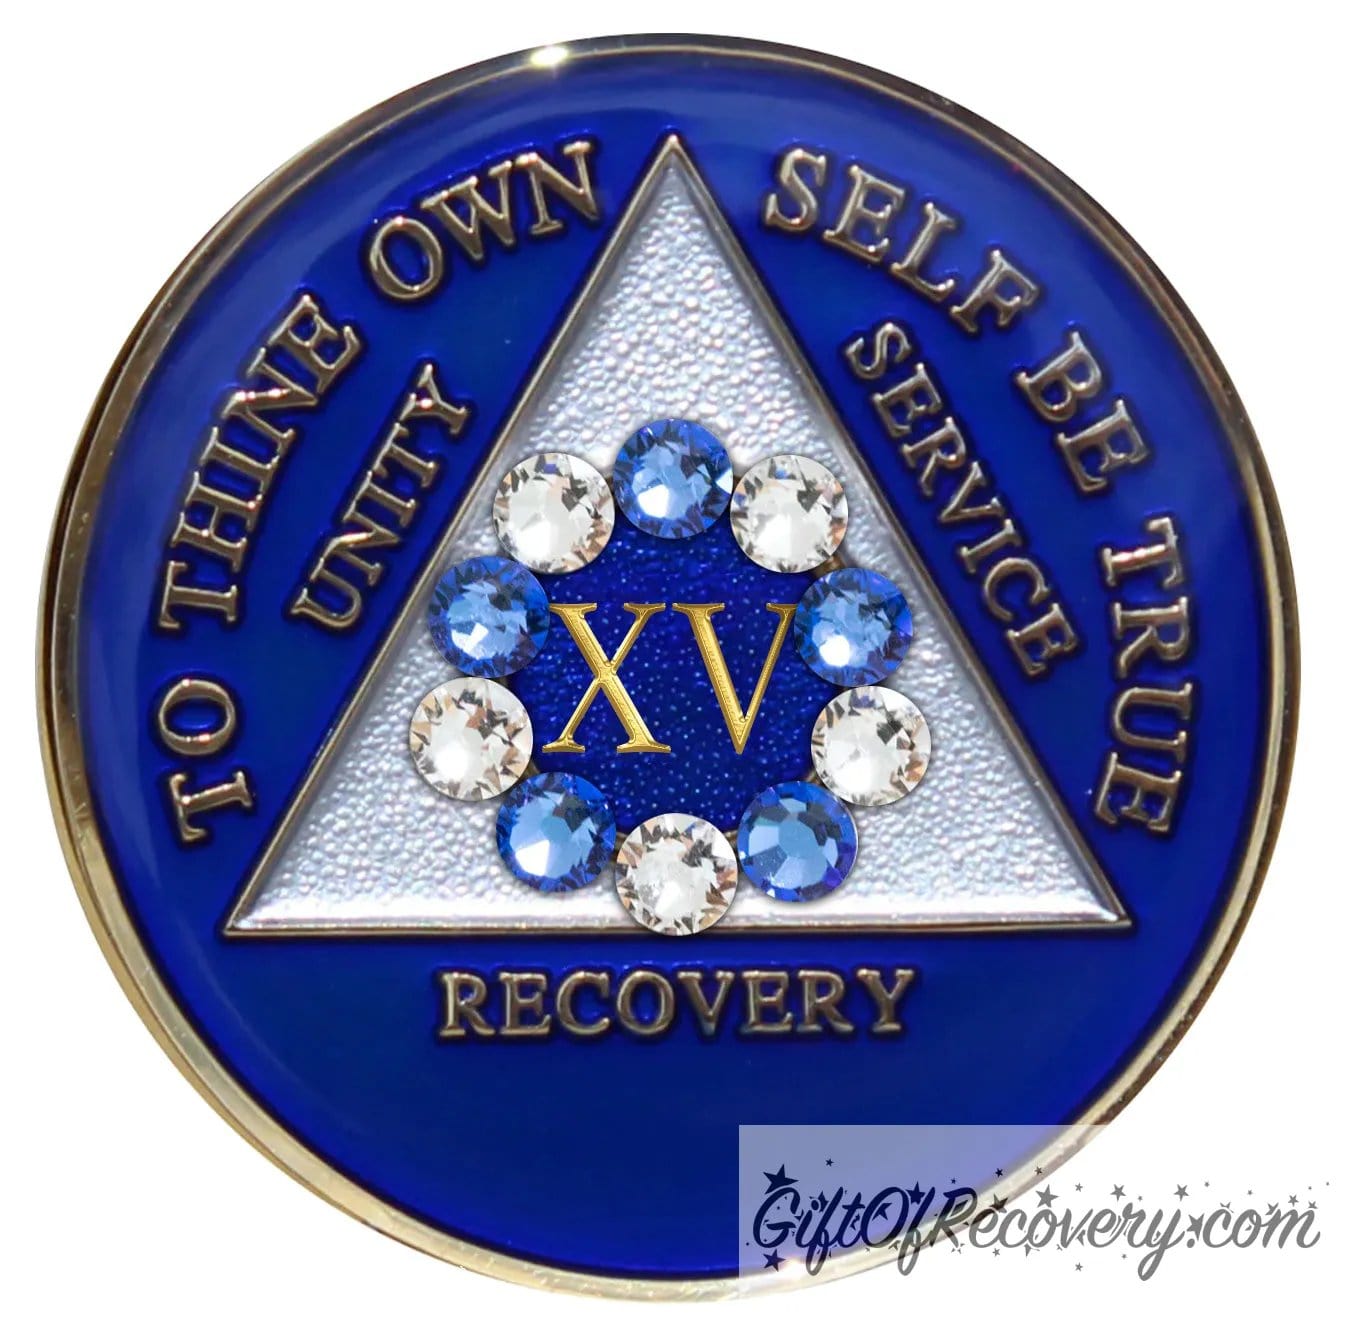 15 Year Big Book Blue AA medallion with 5 blue genuine crystals and 5 clear genuine crystal, making a circle around the 15 year, the recovery medallion has raised lettering to thine own self be true, and the outer rim of the medallion in 14k gold, inside the triangle is white and blue, emphasizing action and reflection.